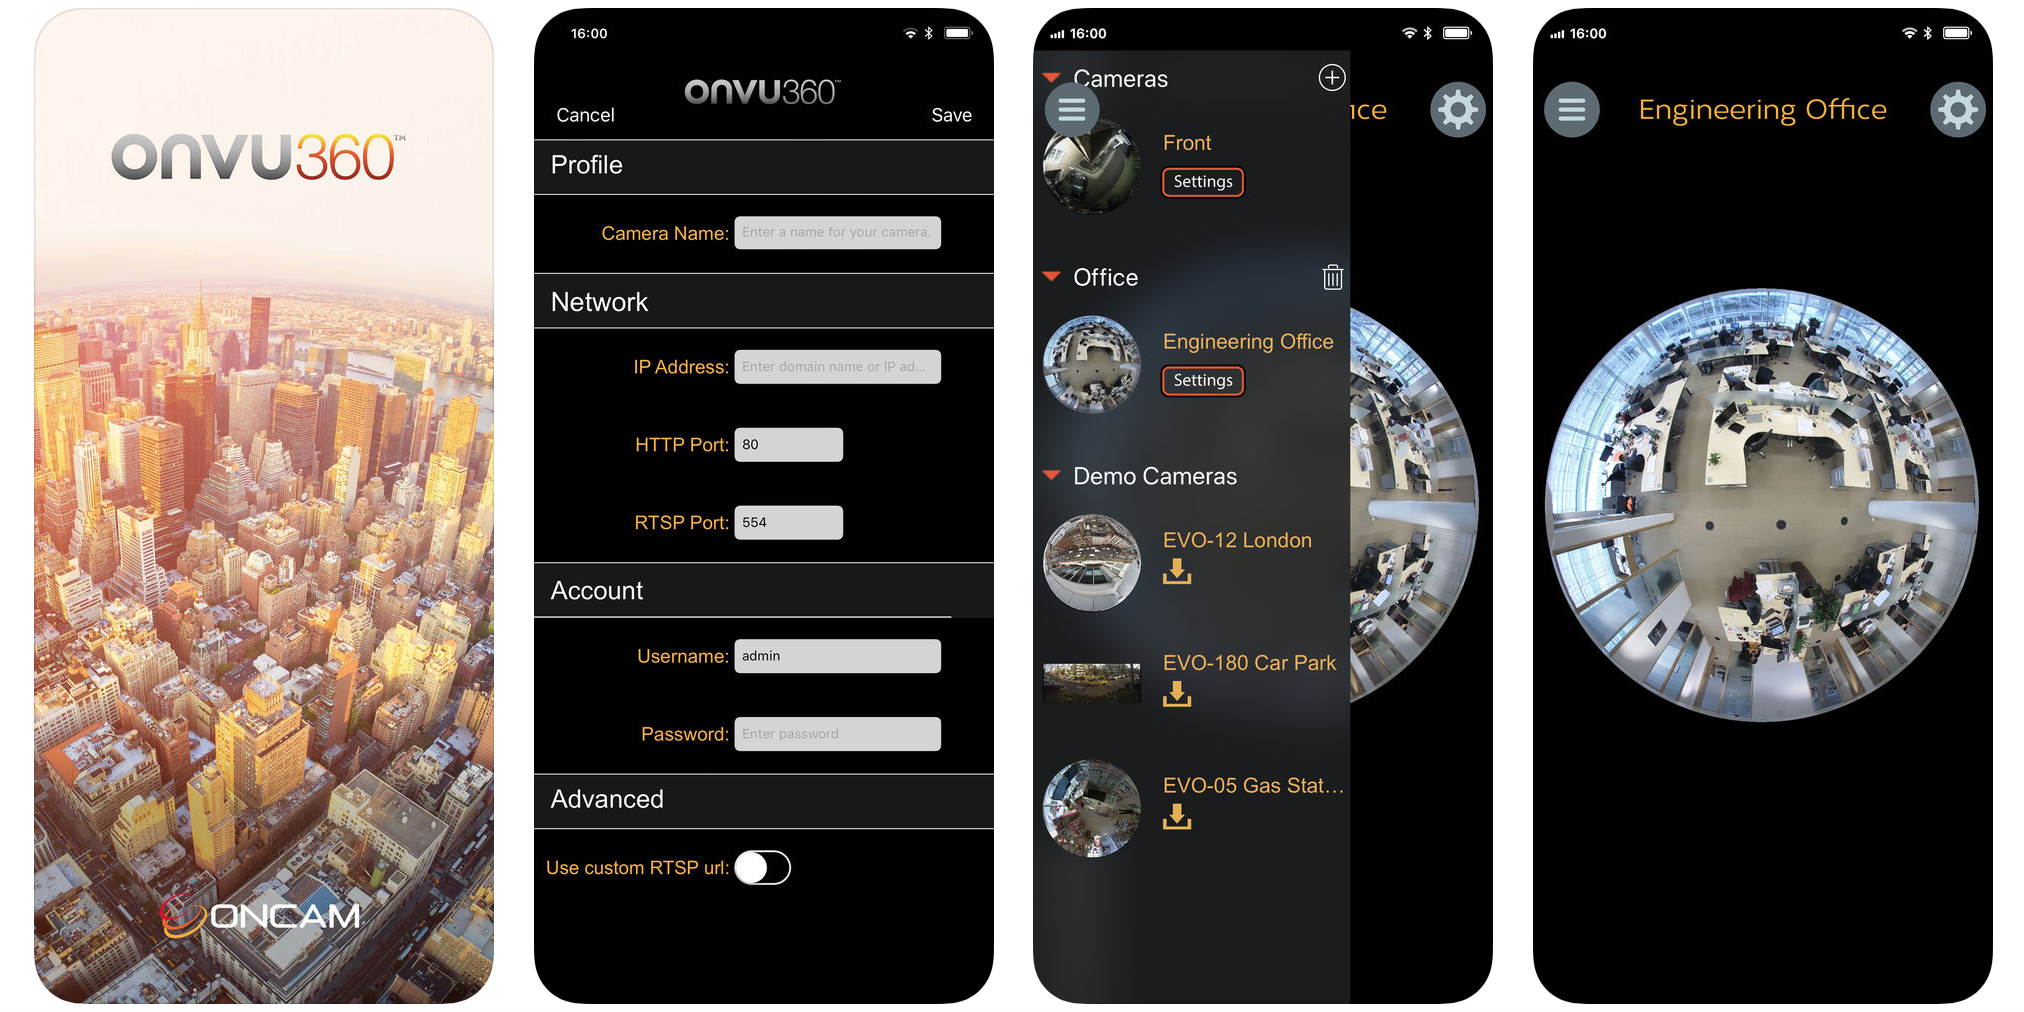 ONVU360 Pro Mobile App Updates Enhance Functionality and Effectiveness